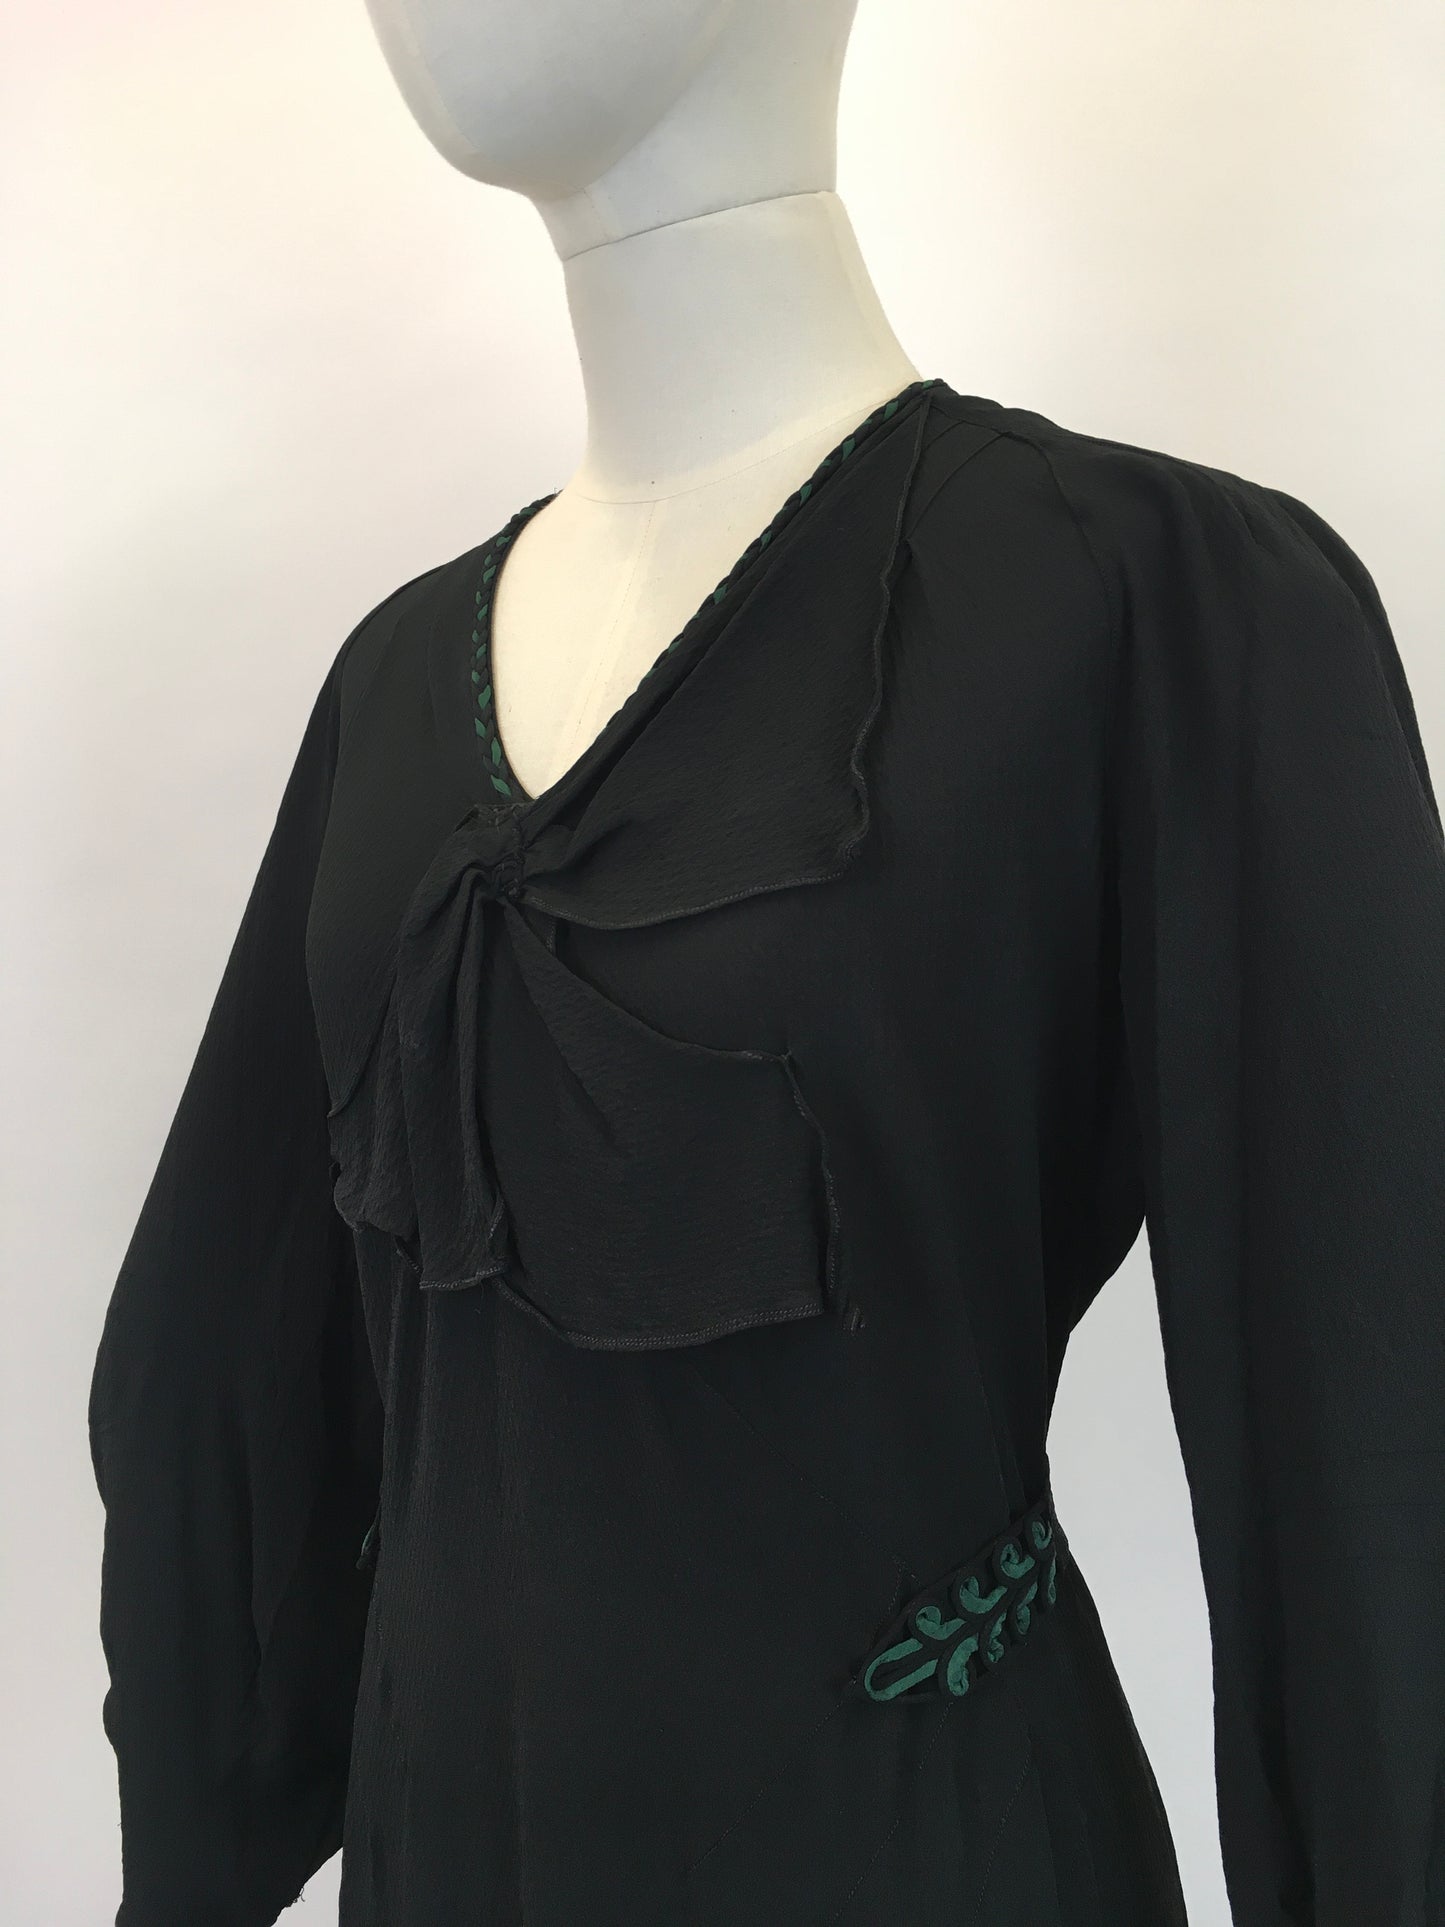 Original 1930's Sensational Evening Dress in Sheer Crepe - In Inky Black with Bottle Green Accents